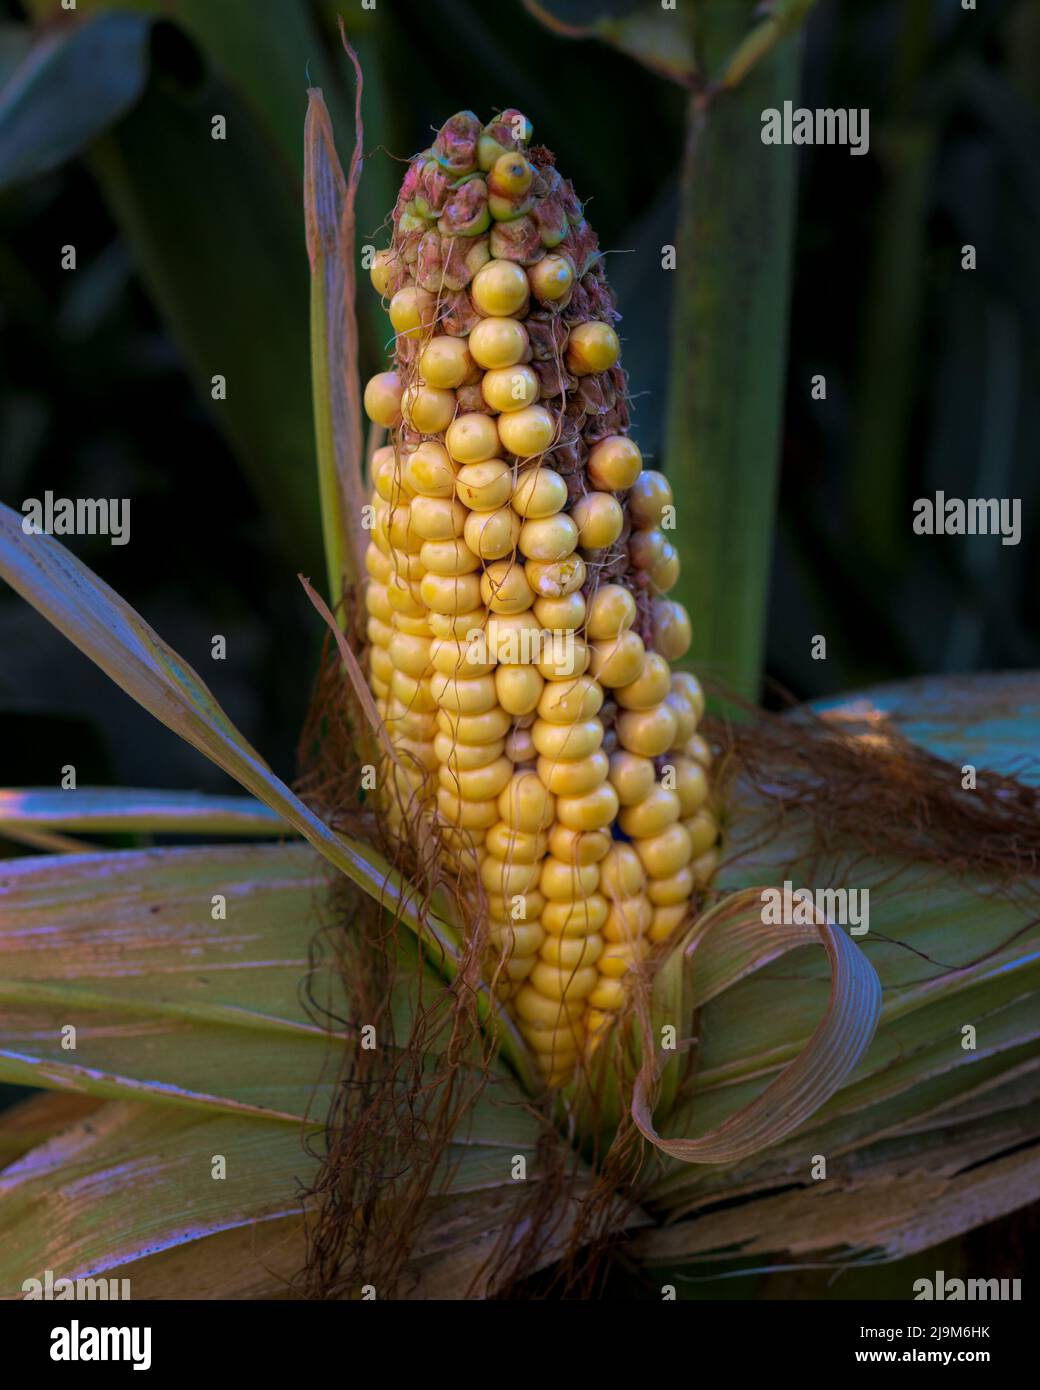 Corn on the cob in the field, mature corn with imperfections Stock Photo